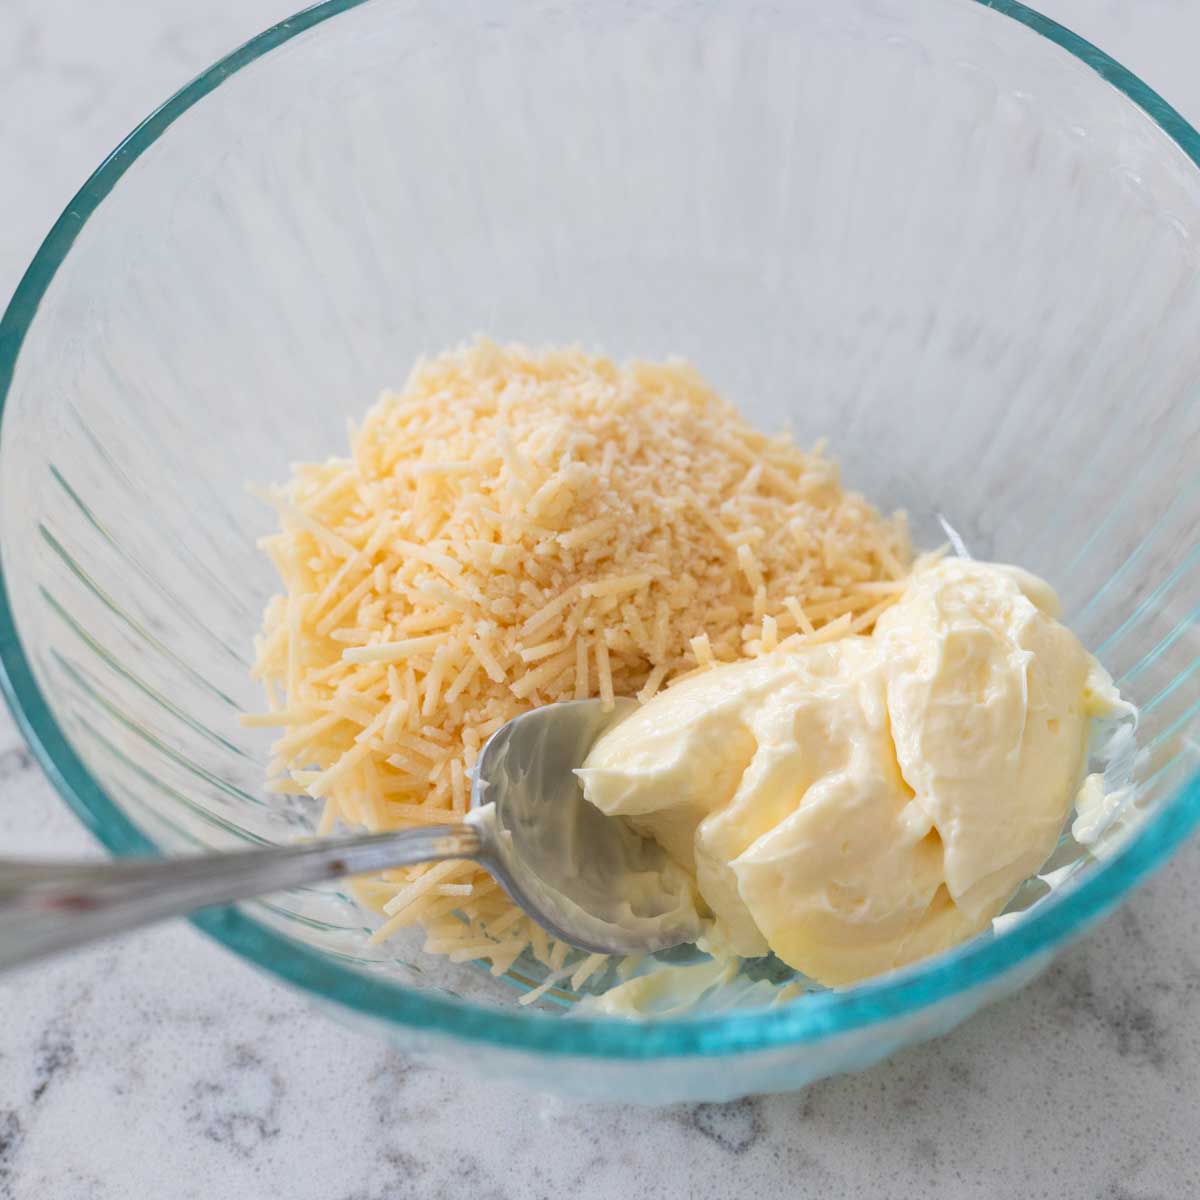 The mixing bowl has the mayo and parmesan being stirred together.